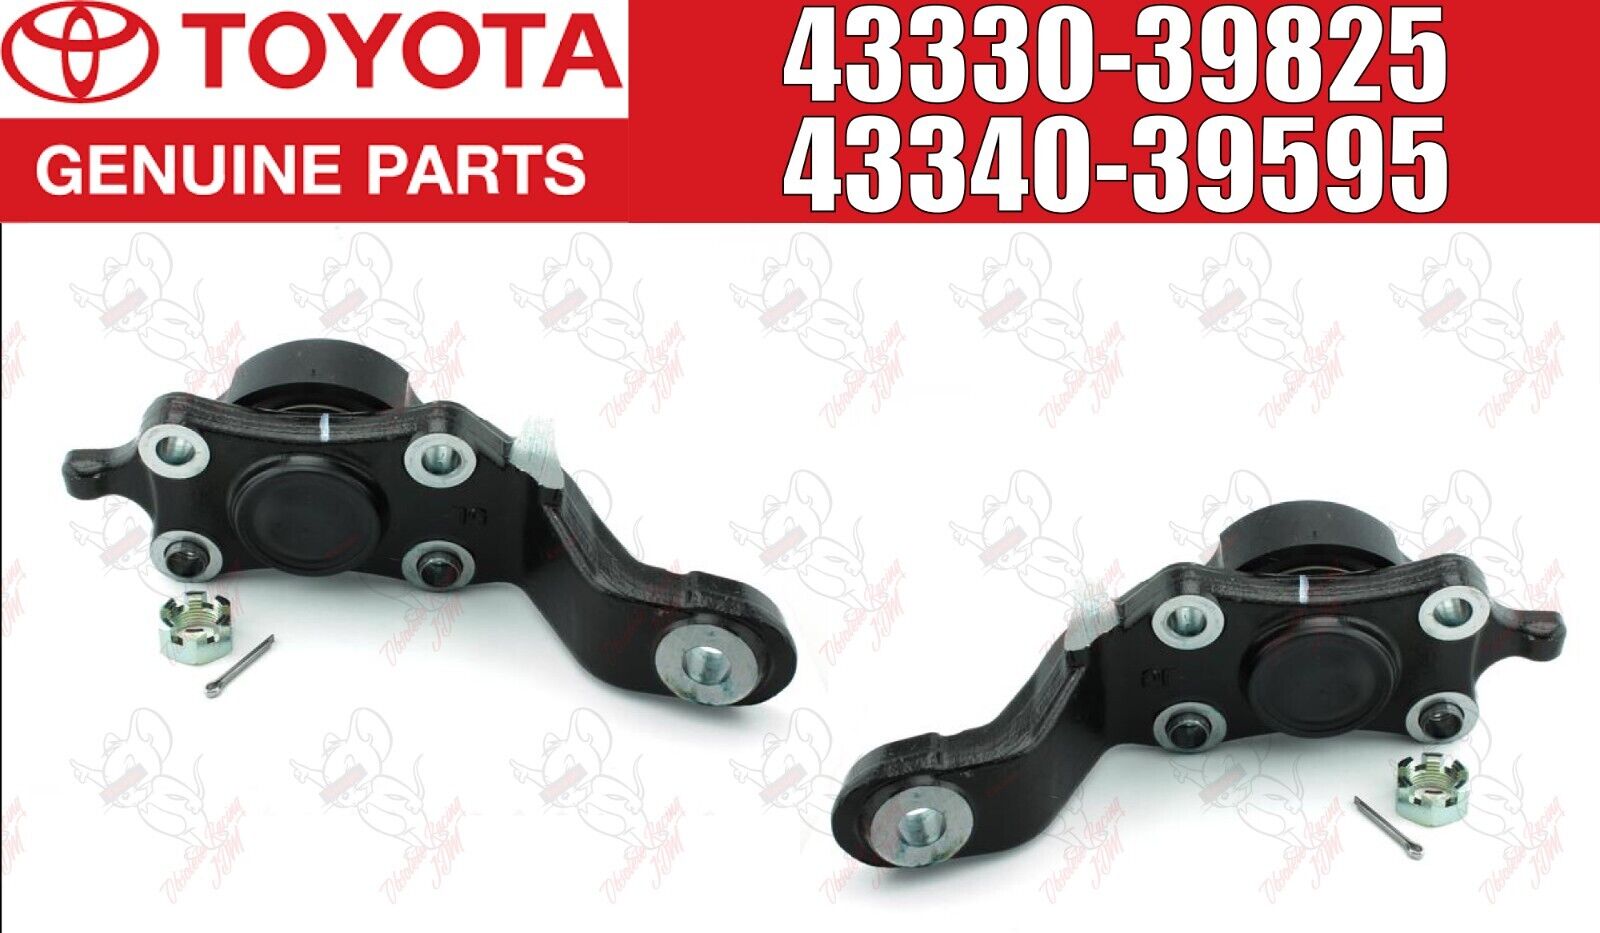 Toyota Genuine Tundra 04-06 Sequoia 04-07 Lower Ball Joint Right & Left Set OEM